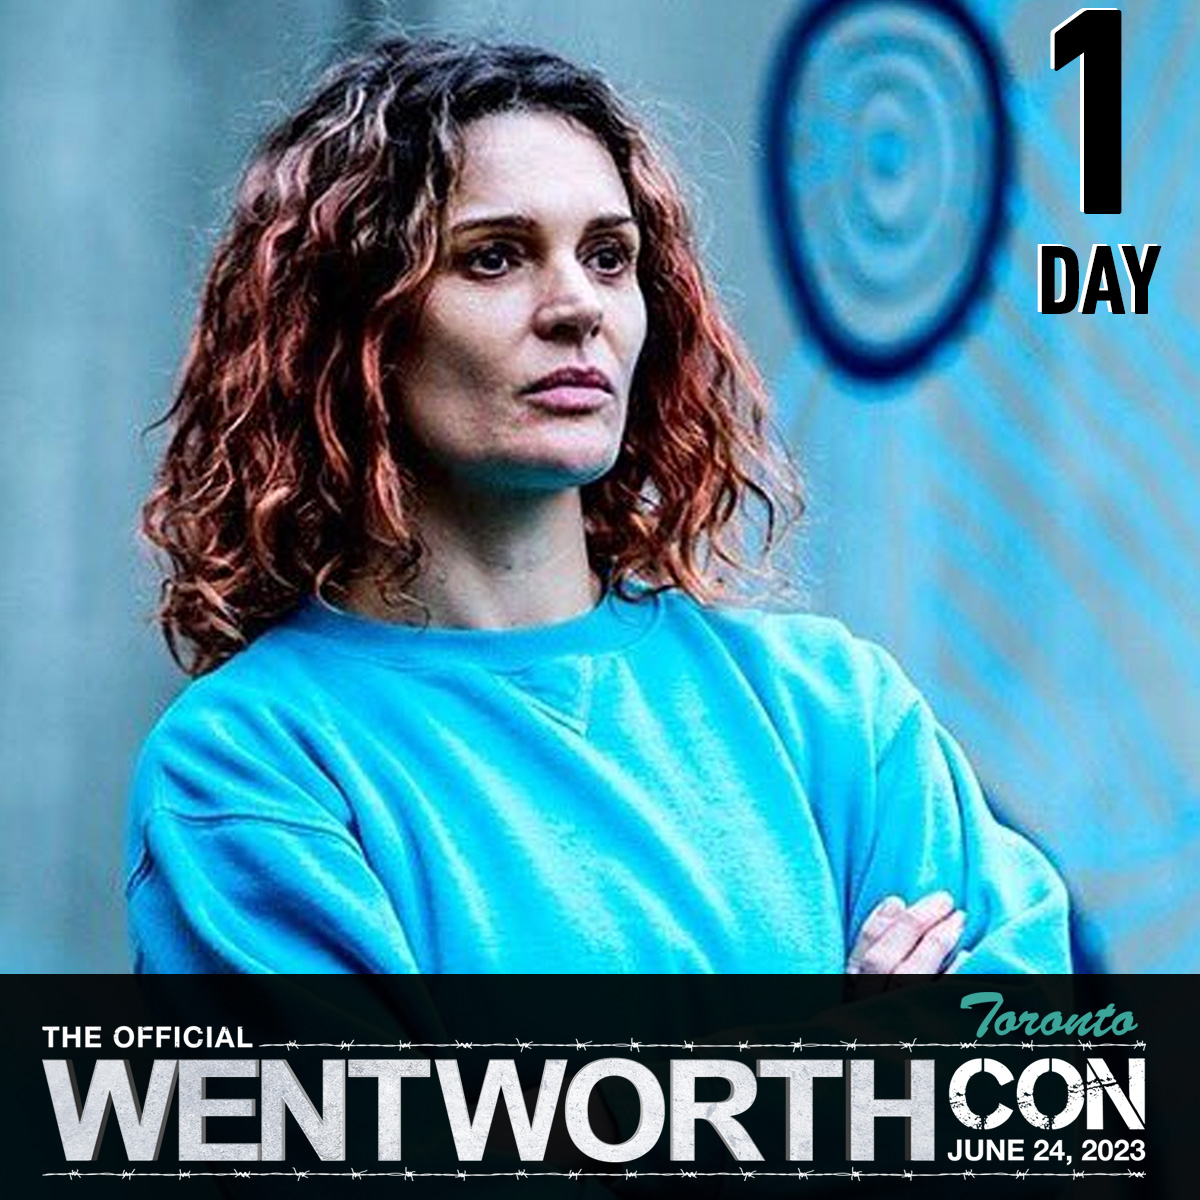 Are. You. Ready. TORONTO?! #WentworthCon starts tomorrow! 💥

Early Registration begins tonight at 6pm in Hazel McCallion D. Our Compound Meet Up will be in the Greenwich room at 7pm.🔥

See you all soon! 😁